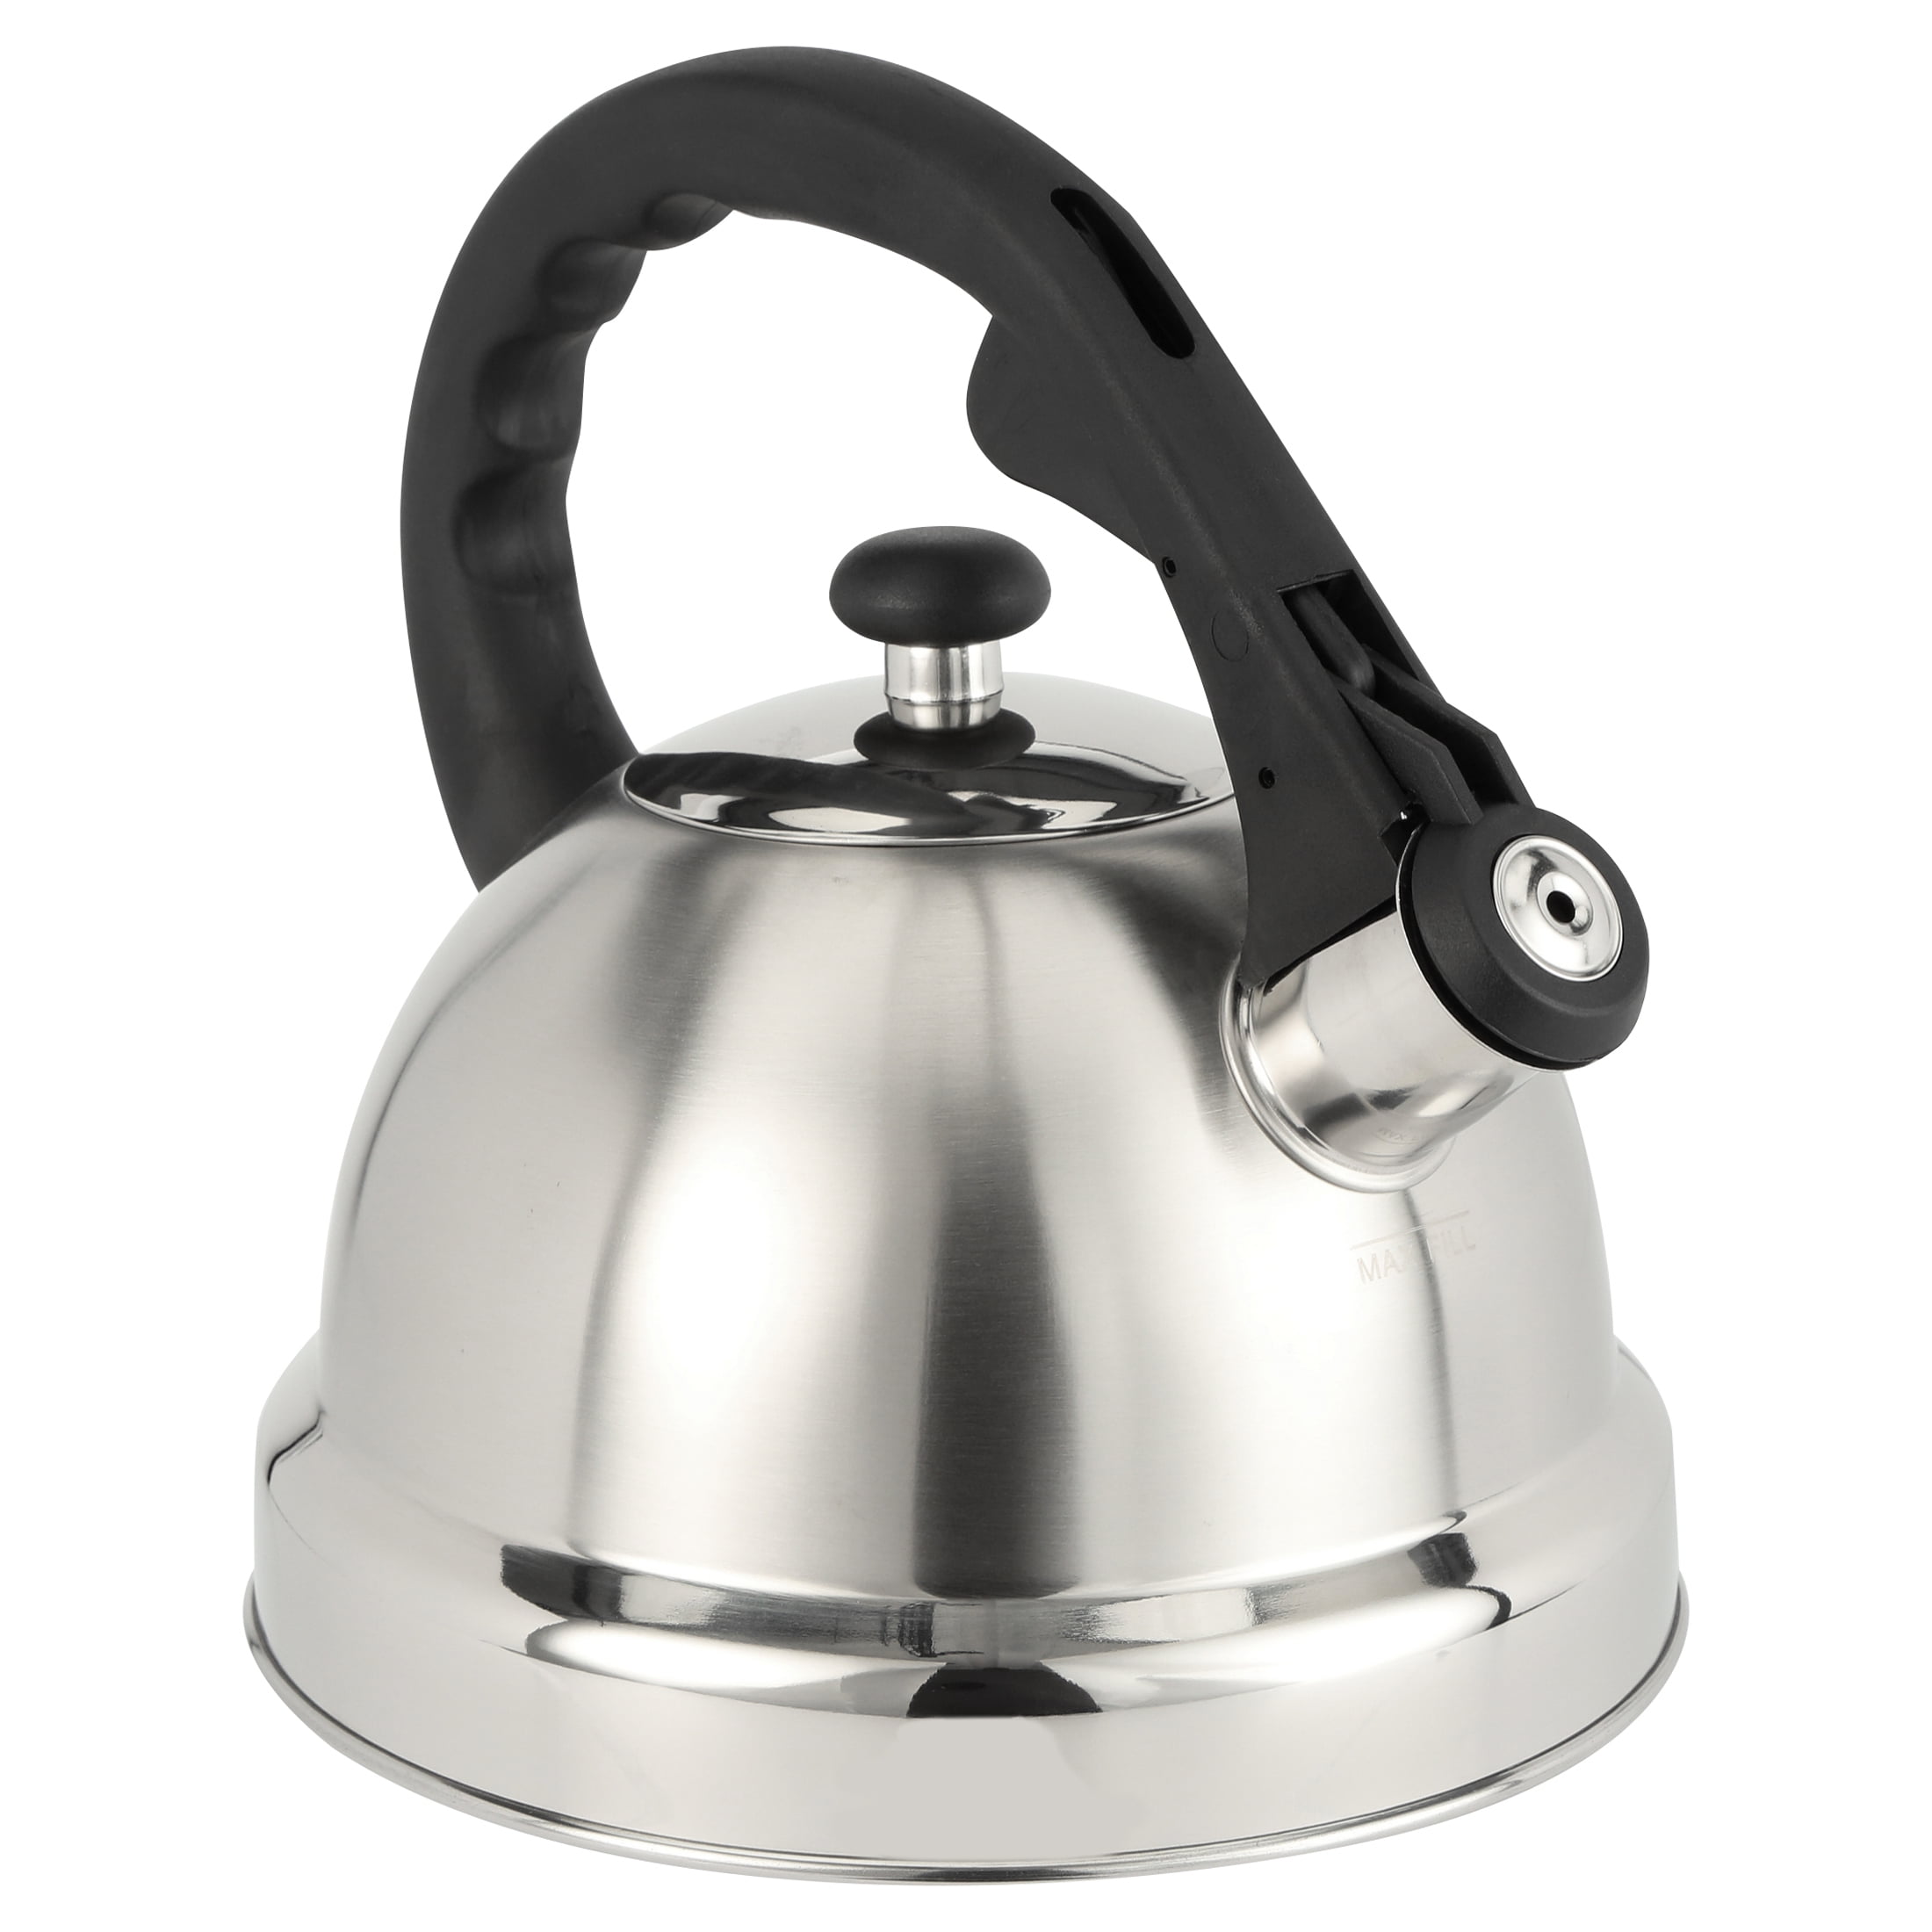 Mr. Coffee® Claredale 1.7 Quart Stainless Steel Whistling Tea Kettle in Red  with Nylon Handle